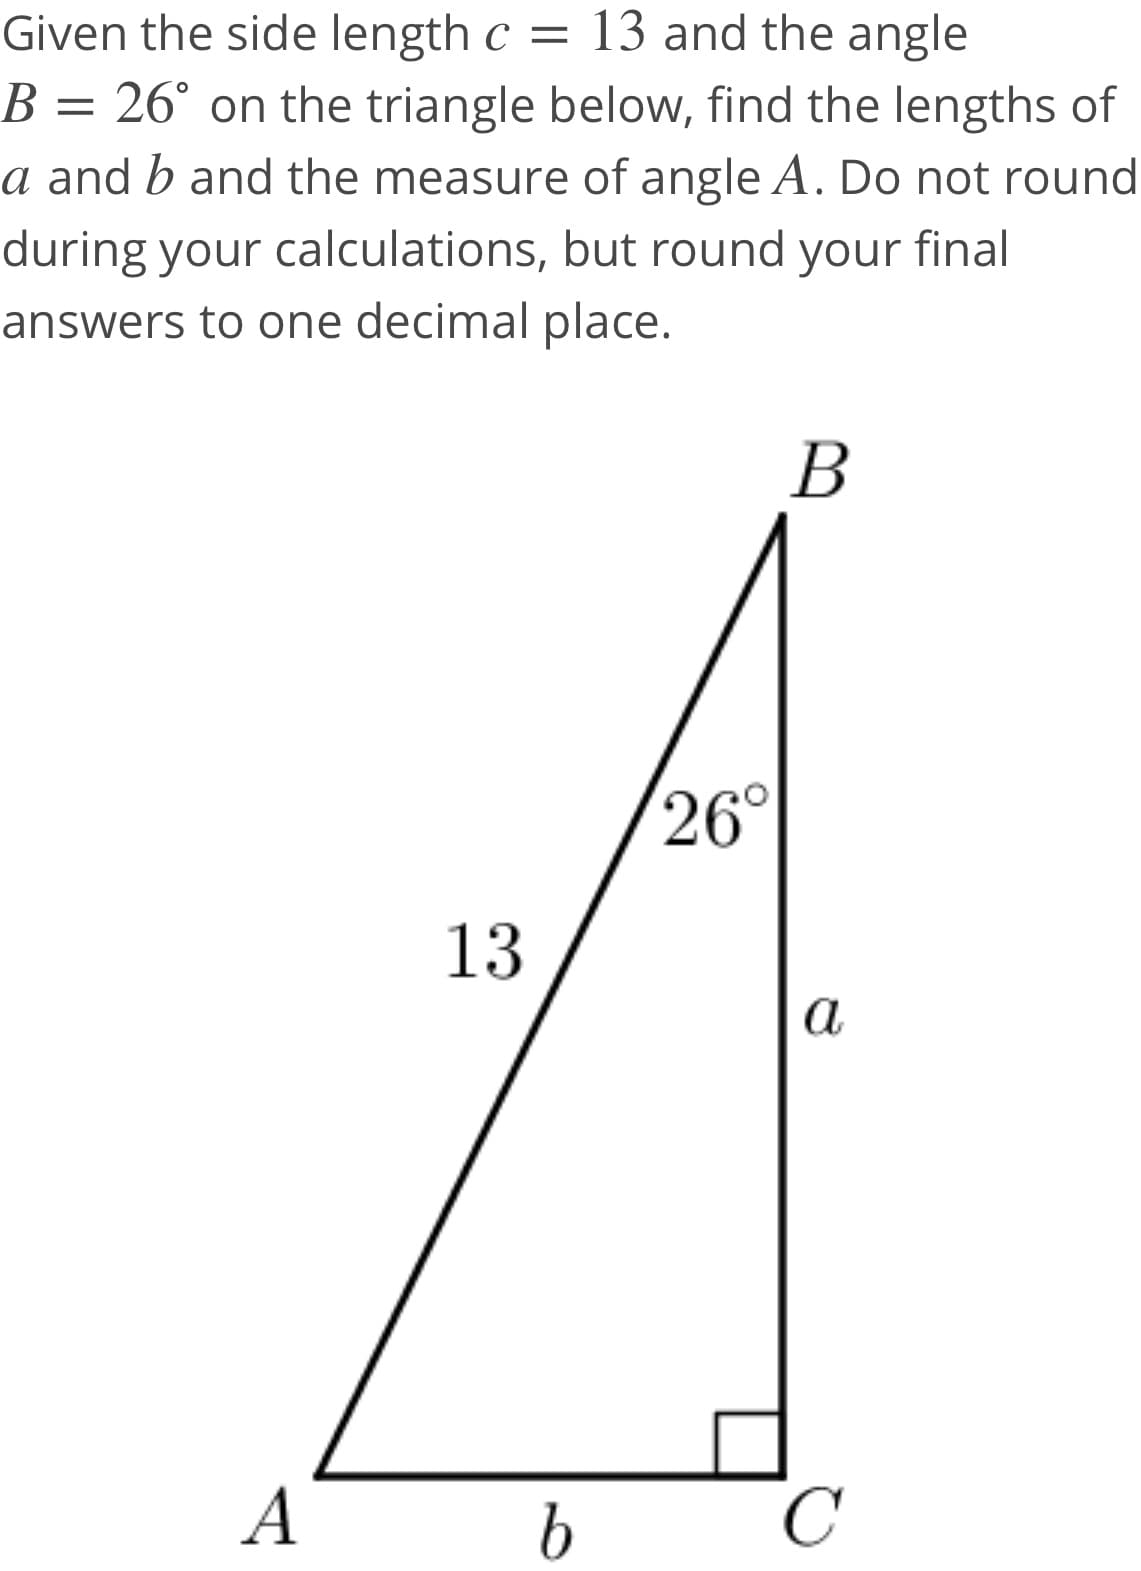 Given the side length c = 13 and the angle
B = 26° on the triangle below, find the lengths of
a and b and the measure of angle A. Do not round
during your calculations, but round your final
answers to one decimal place.
В
26°
13
а
A
C
